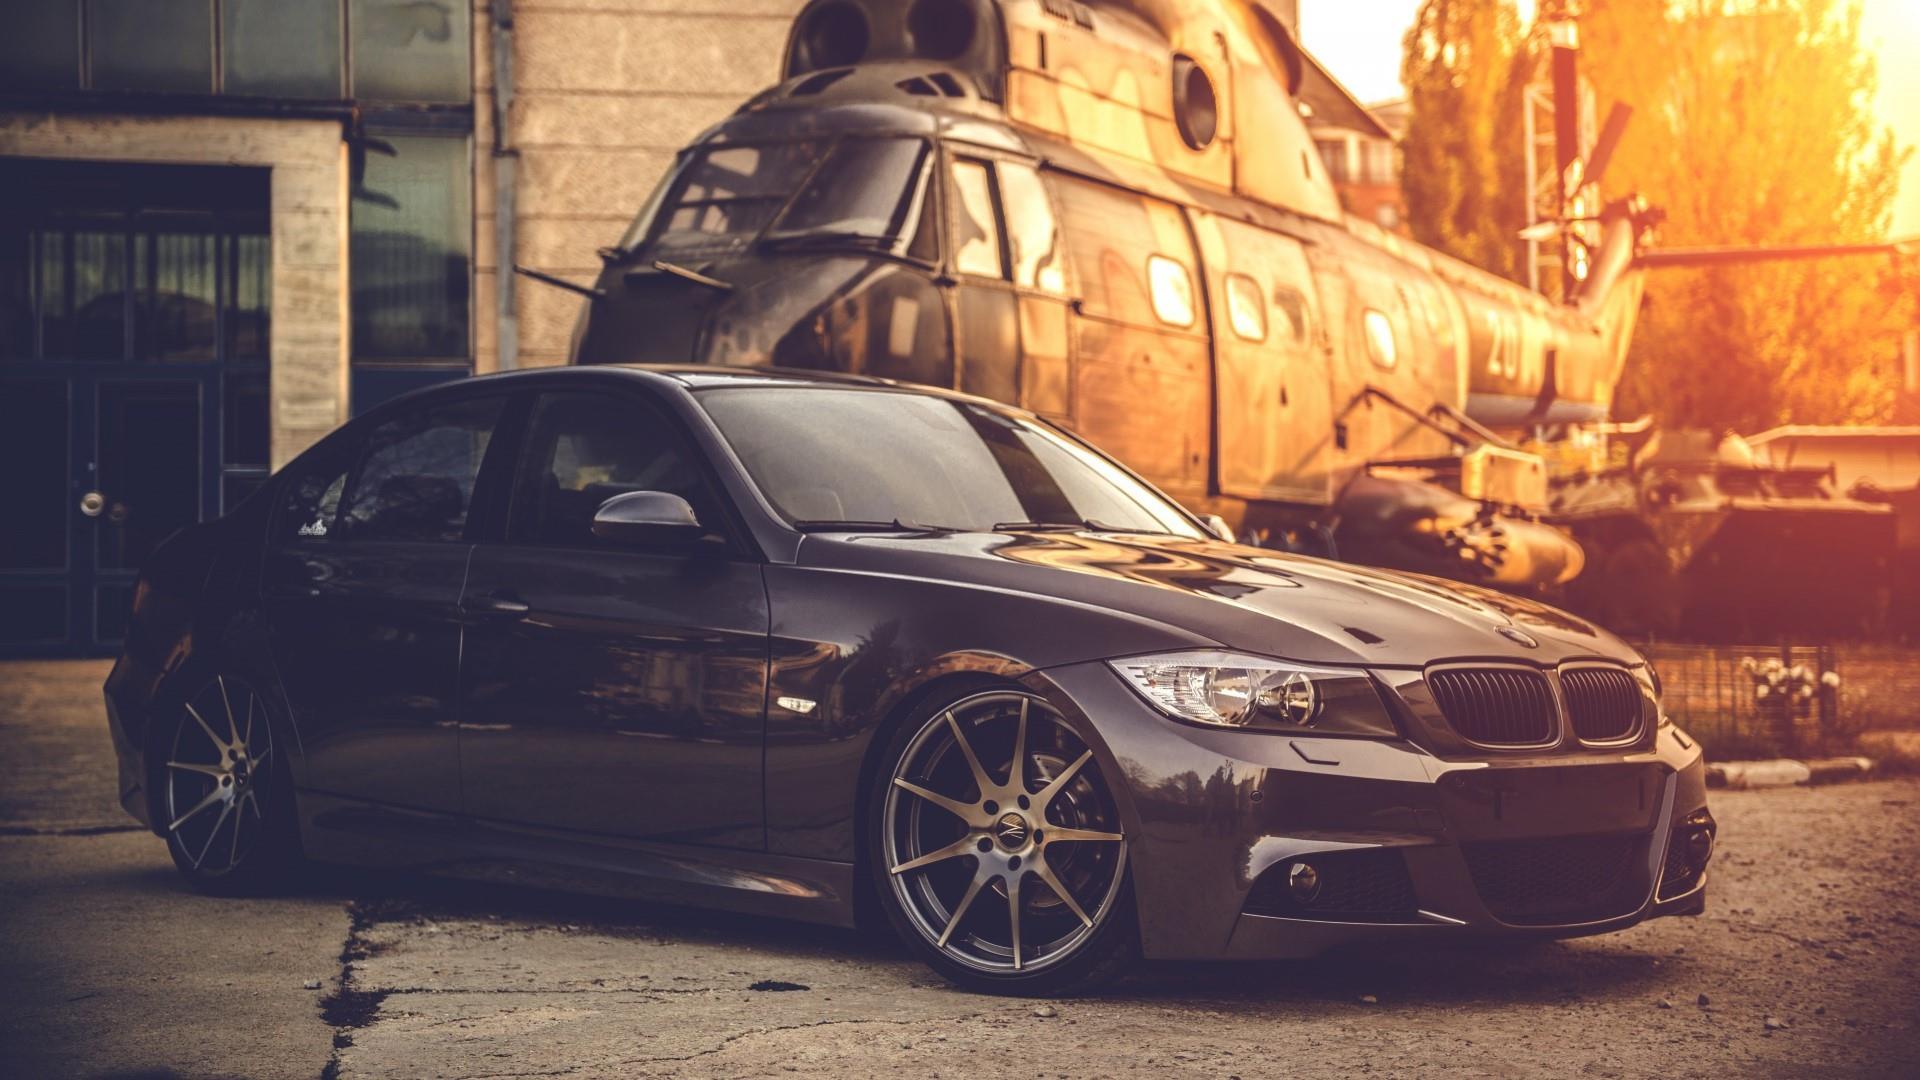 Black BMW E90 With A Helicopter Wallpaper. Wallpaper Studio 10